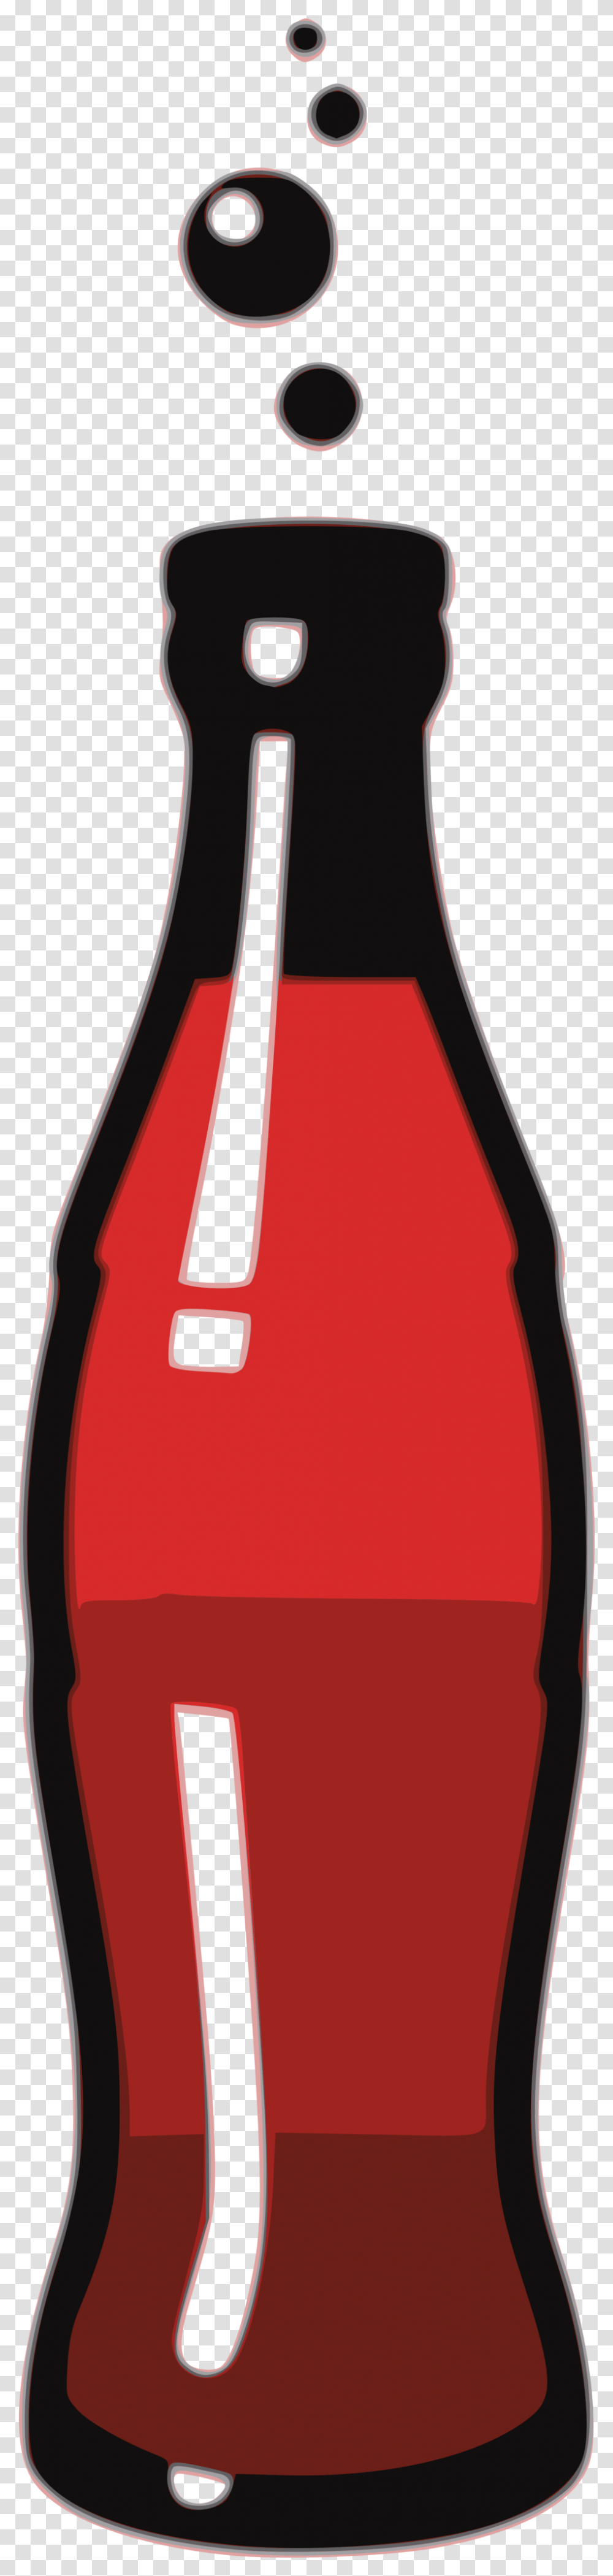 Soda Bottle Clip Art Clipart Clip Art Soda Bottle, Food, Leisure Activities, Label Transparent Png